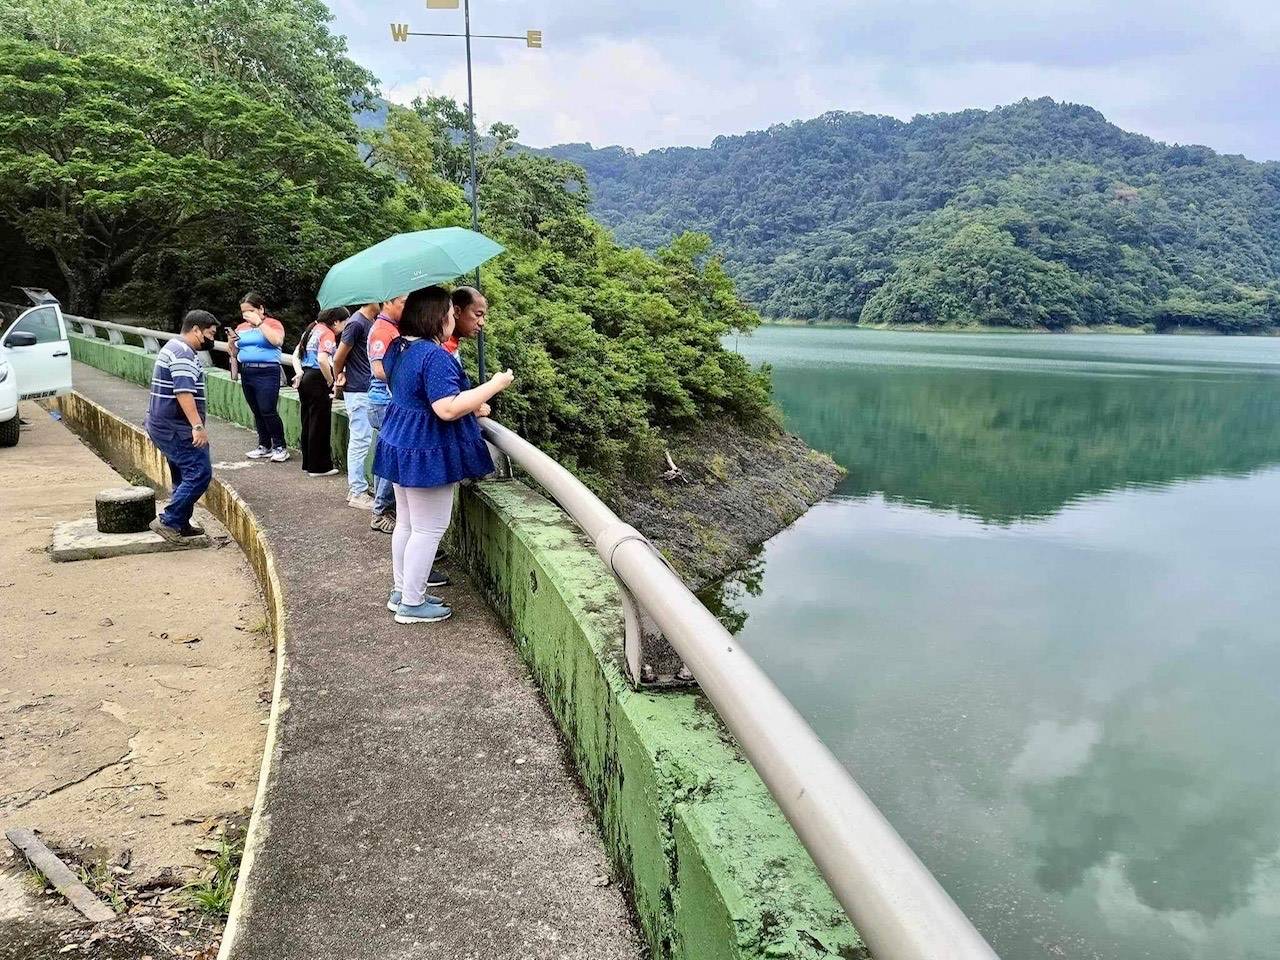 angat dam, other water sources drying up due to lack of rainfall